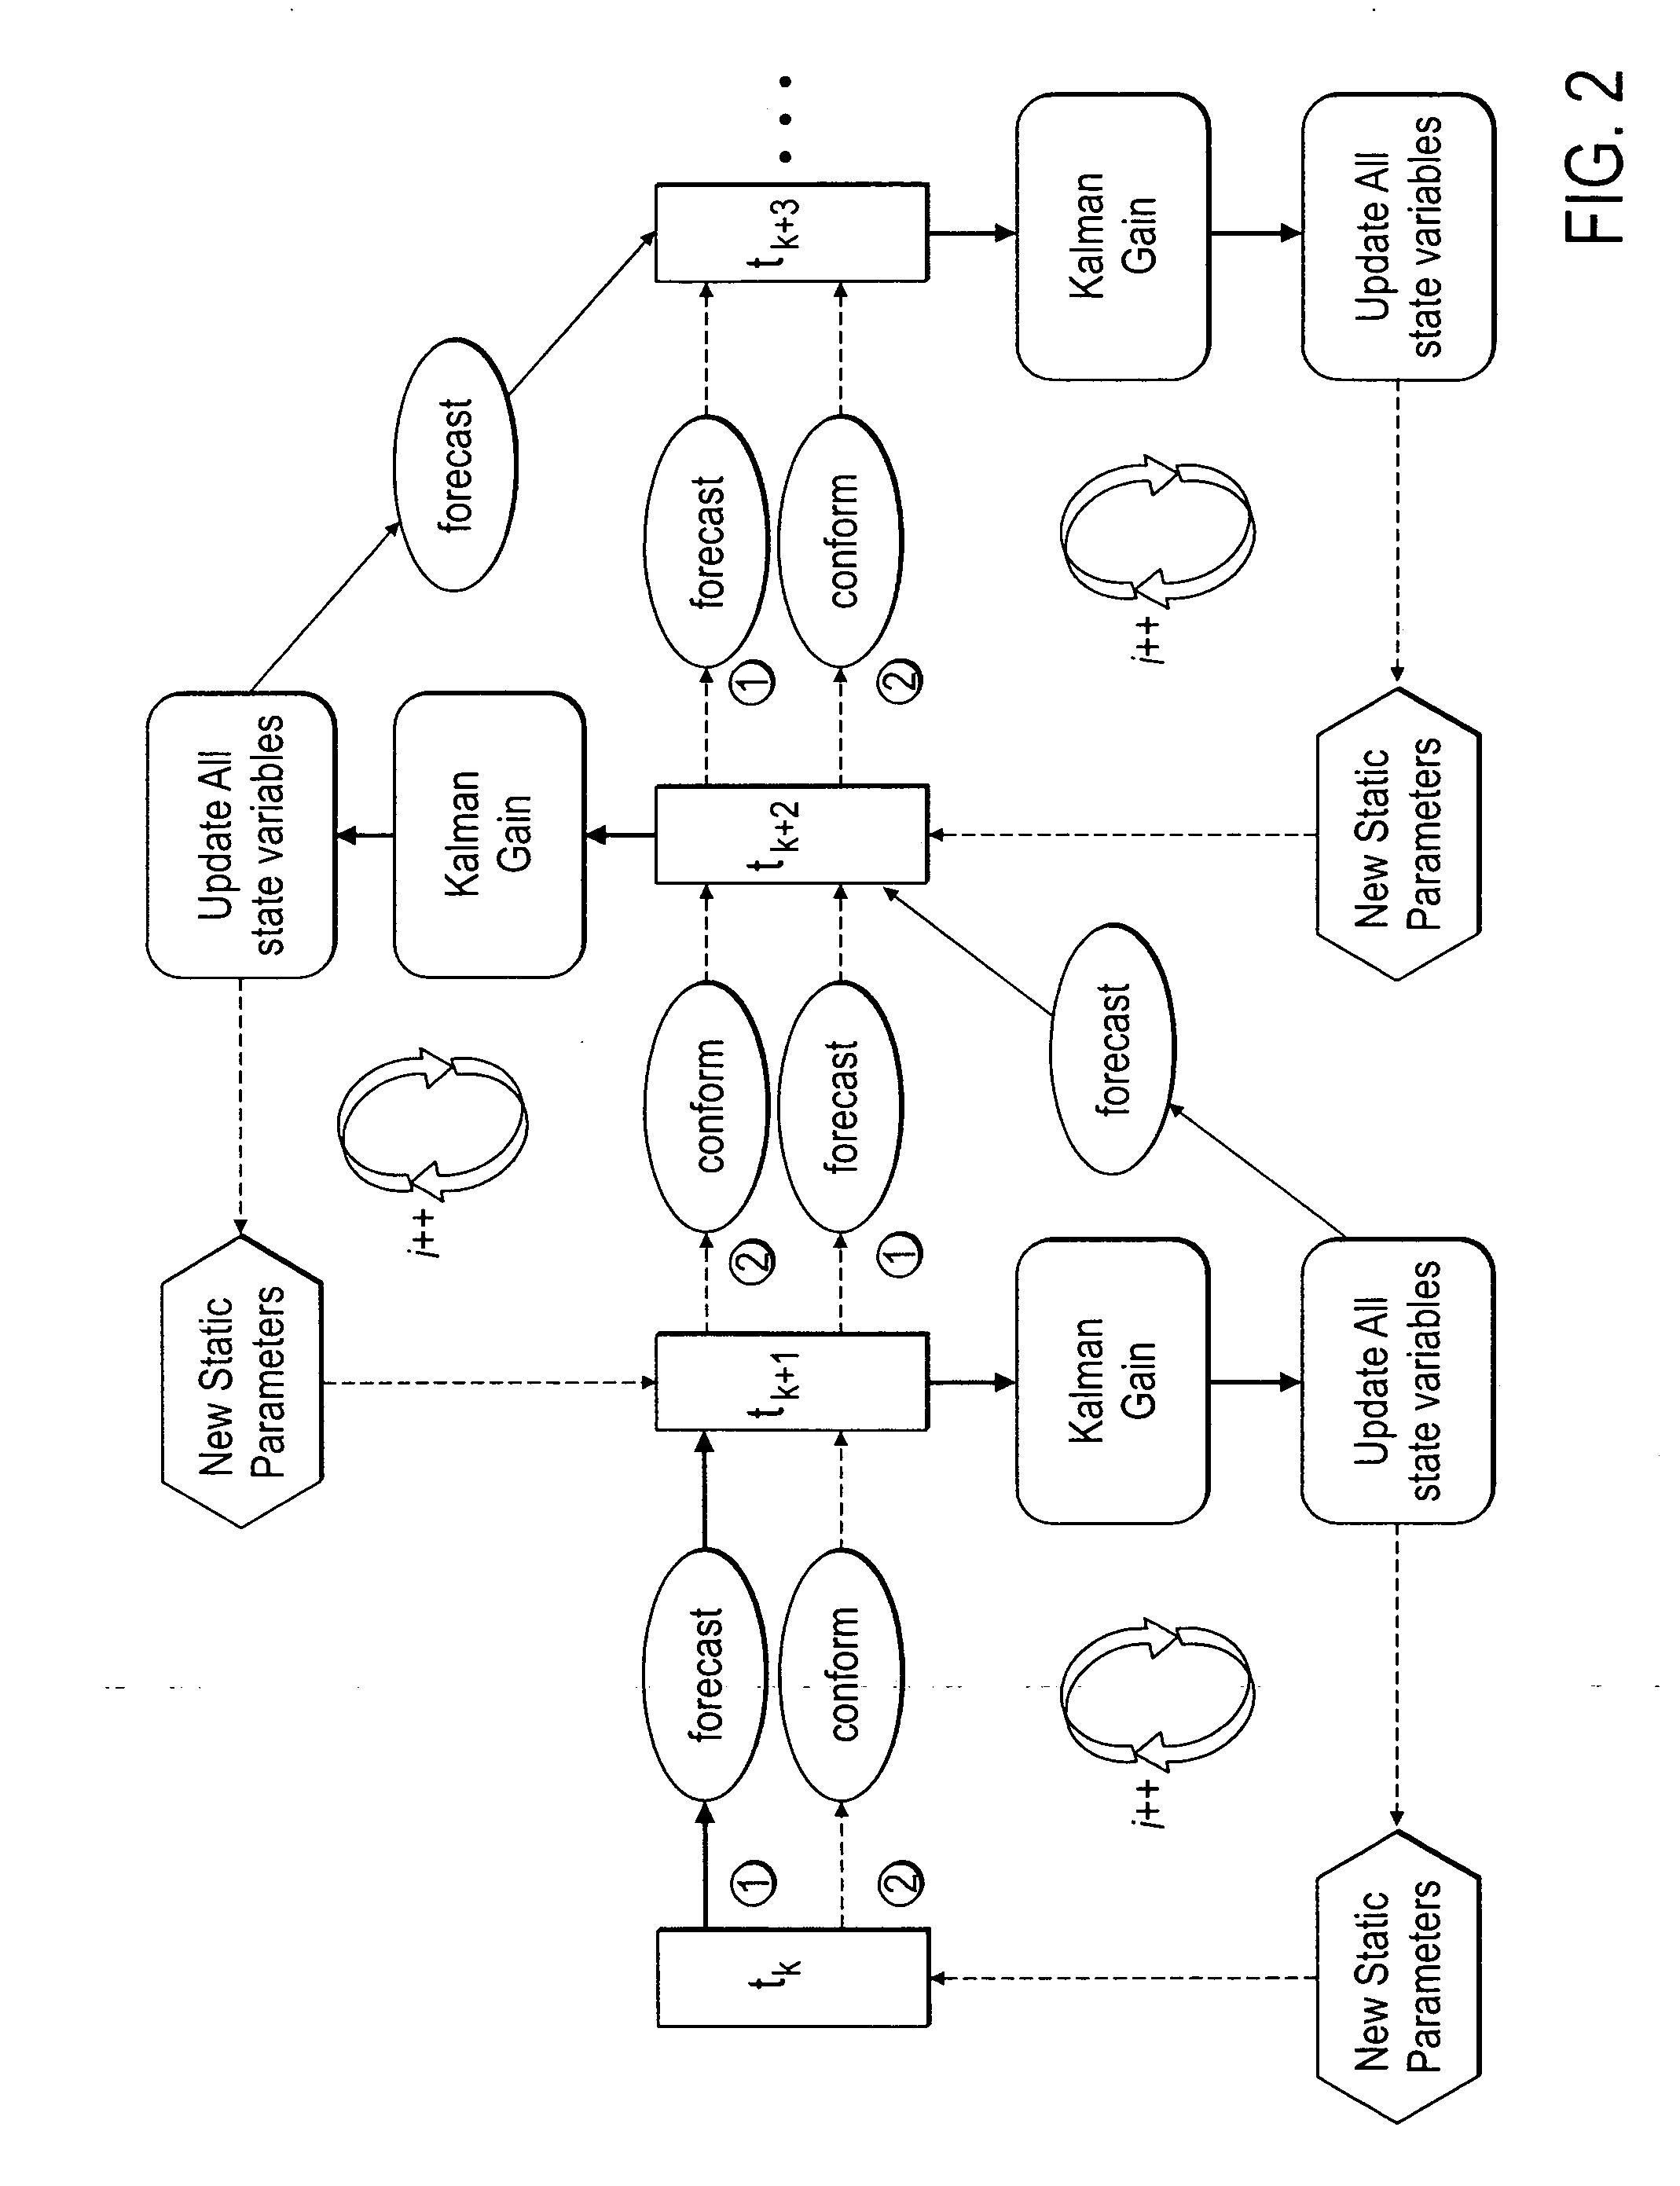 Method, system and apparatus for real-time reservoir model updating using ensemble Kalman filter